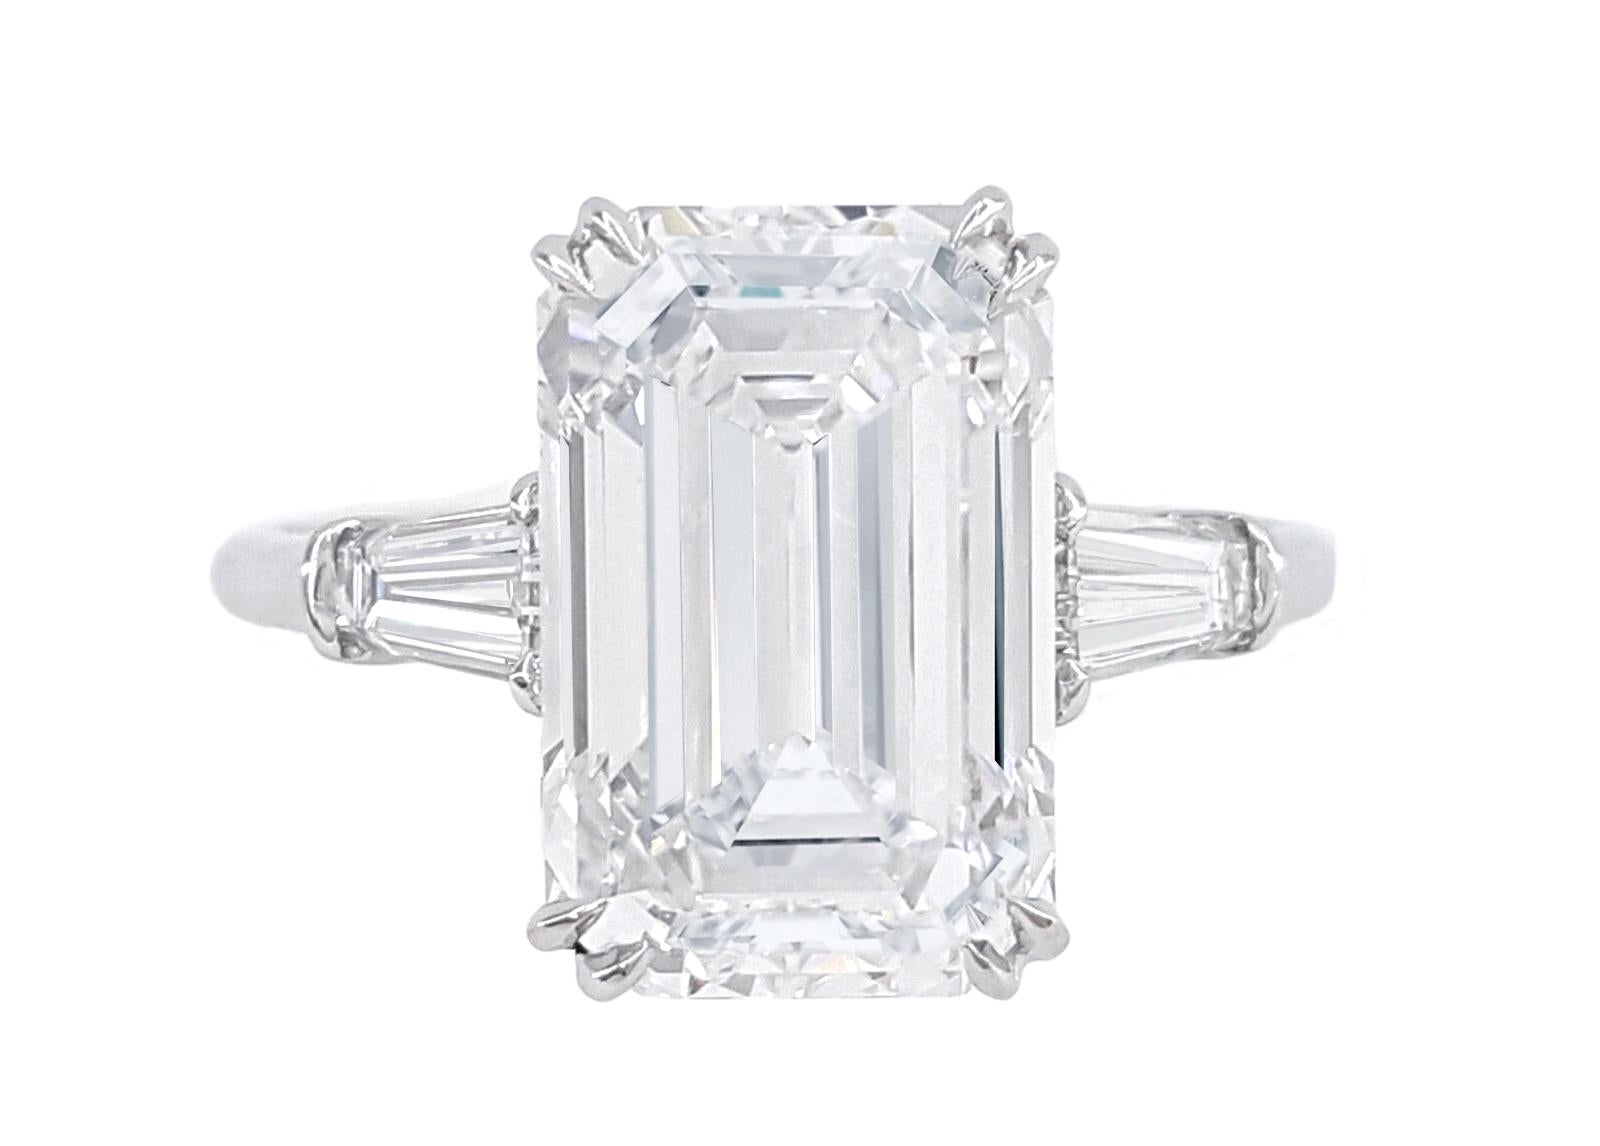 This resplendent ring showcases a magnificent 6-carat emerald-cut diamond, certified by the esteemed Gemological Institute of America (GIA) to guarantee its exceptional quality and authenticity. The diamond boasts an impeccable D color grade,